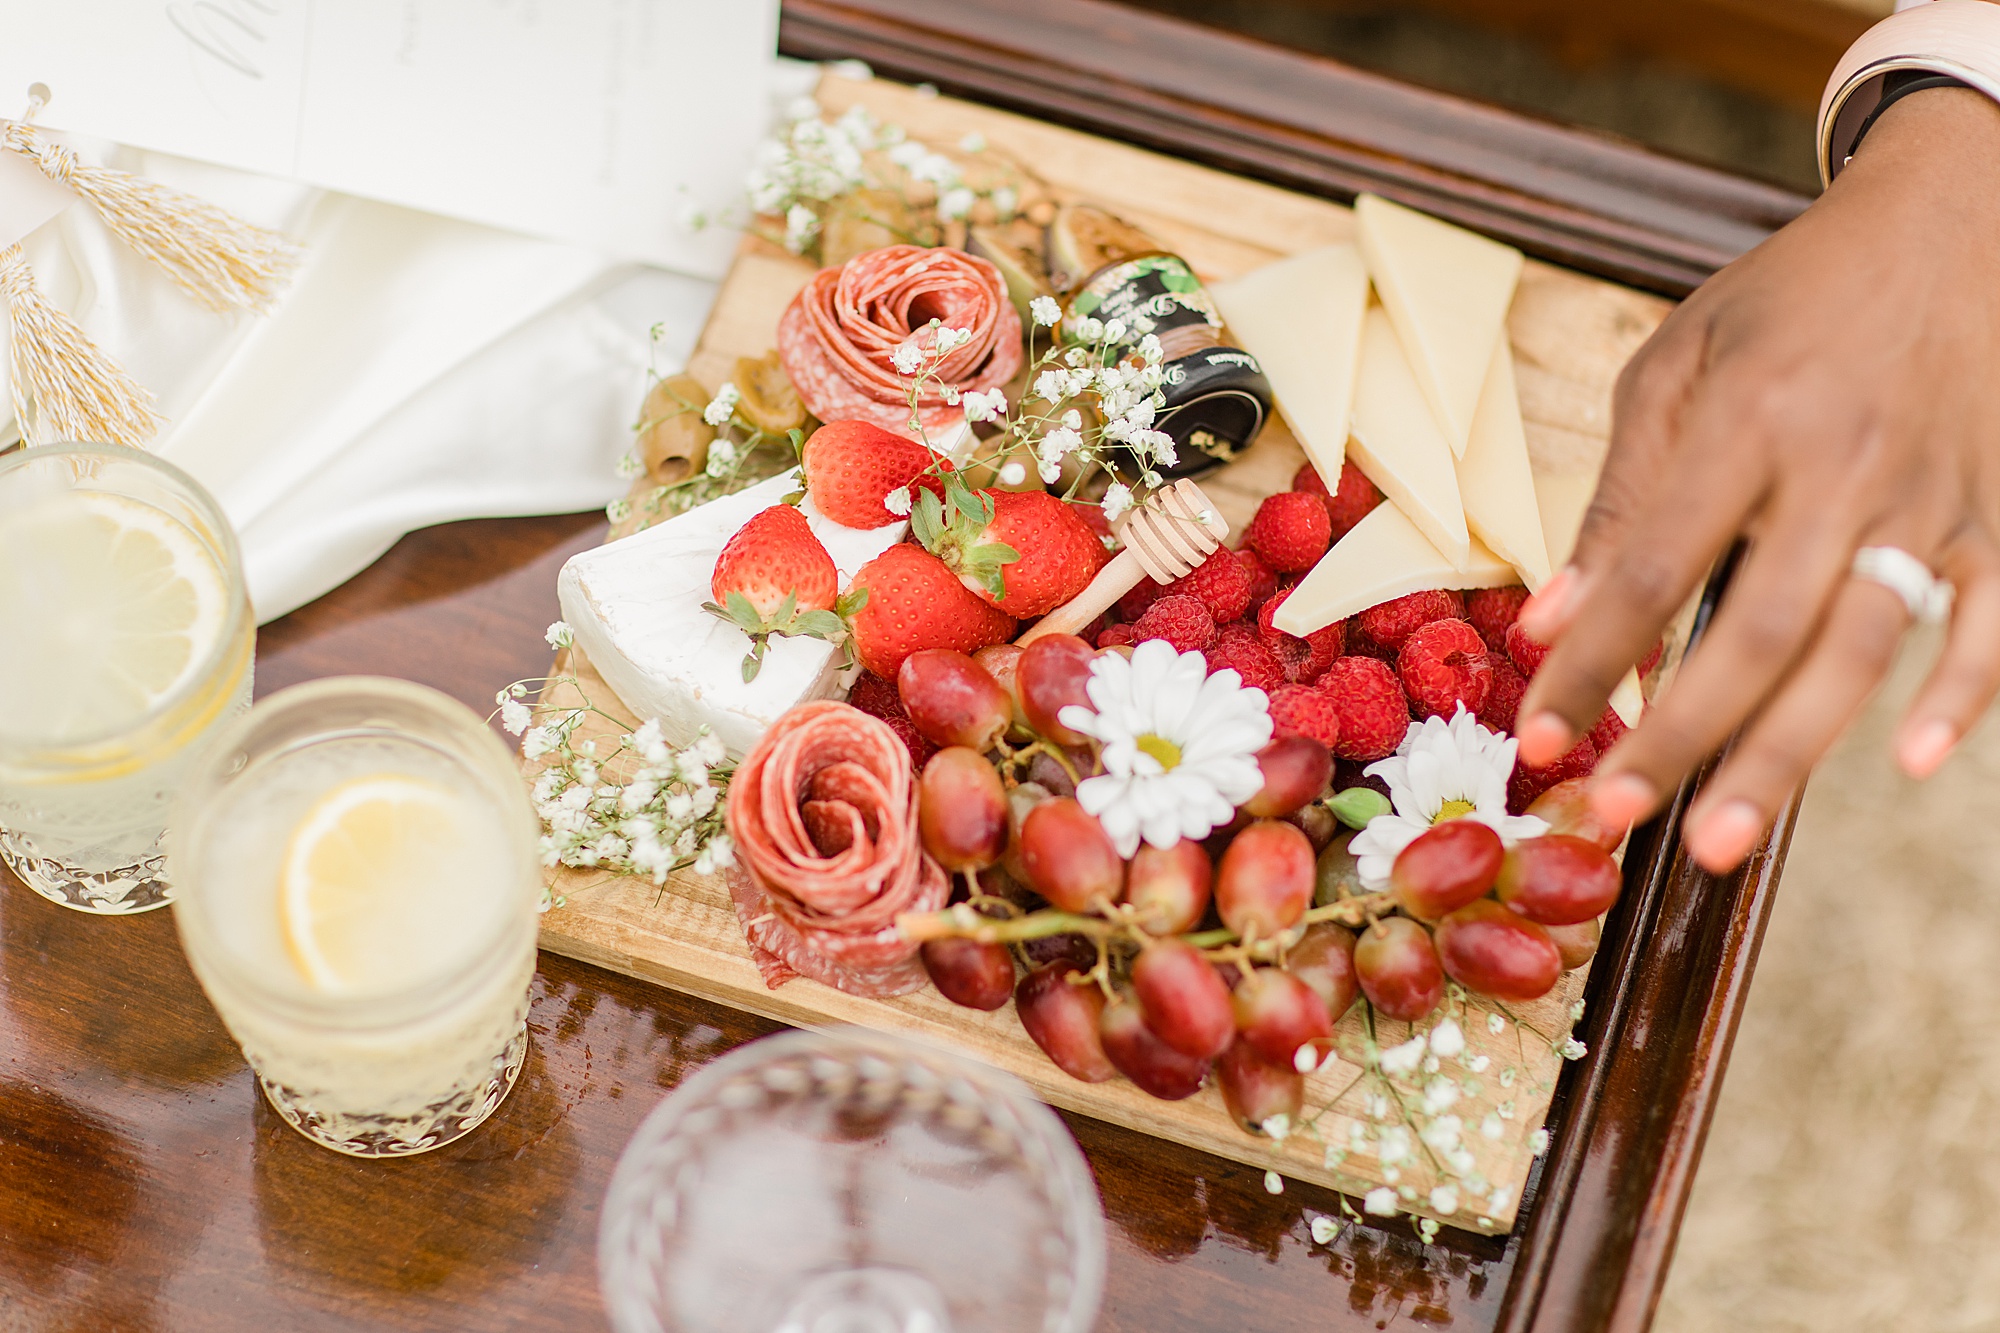 styled charcuterie board from Brie's Boards